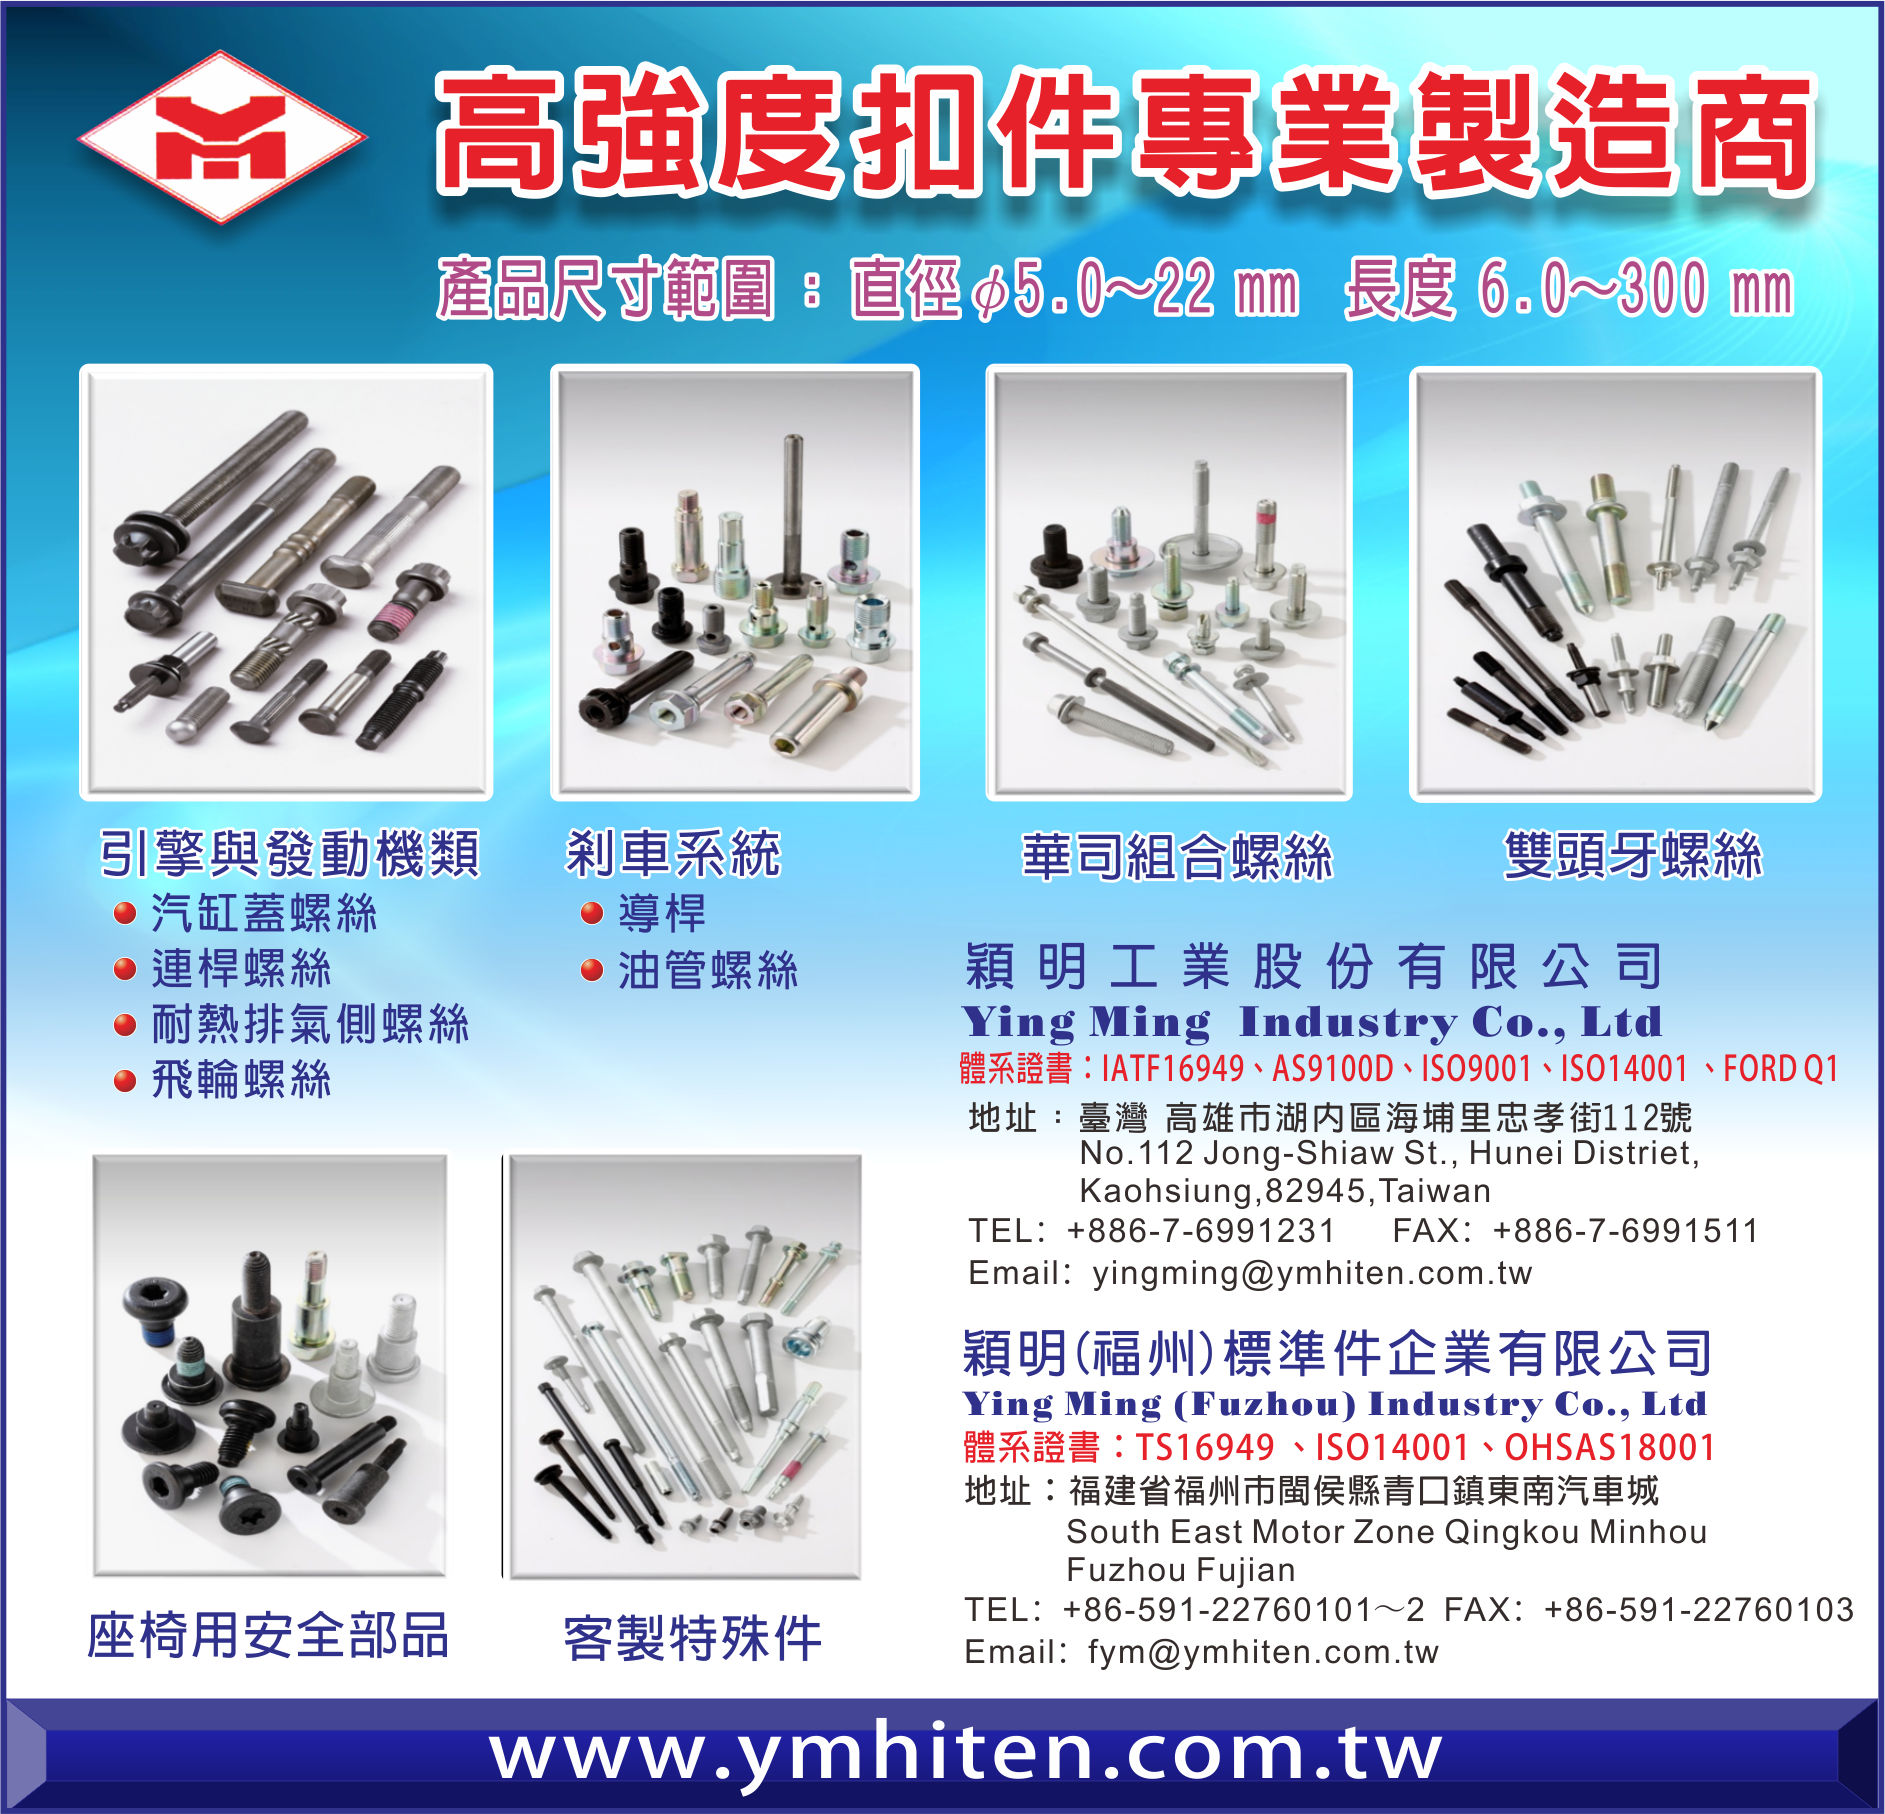 YING MING INDUSTRY CO., LTD. _Online Catalogues